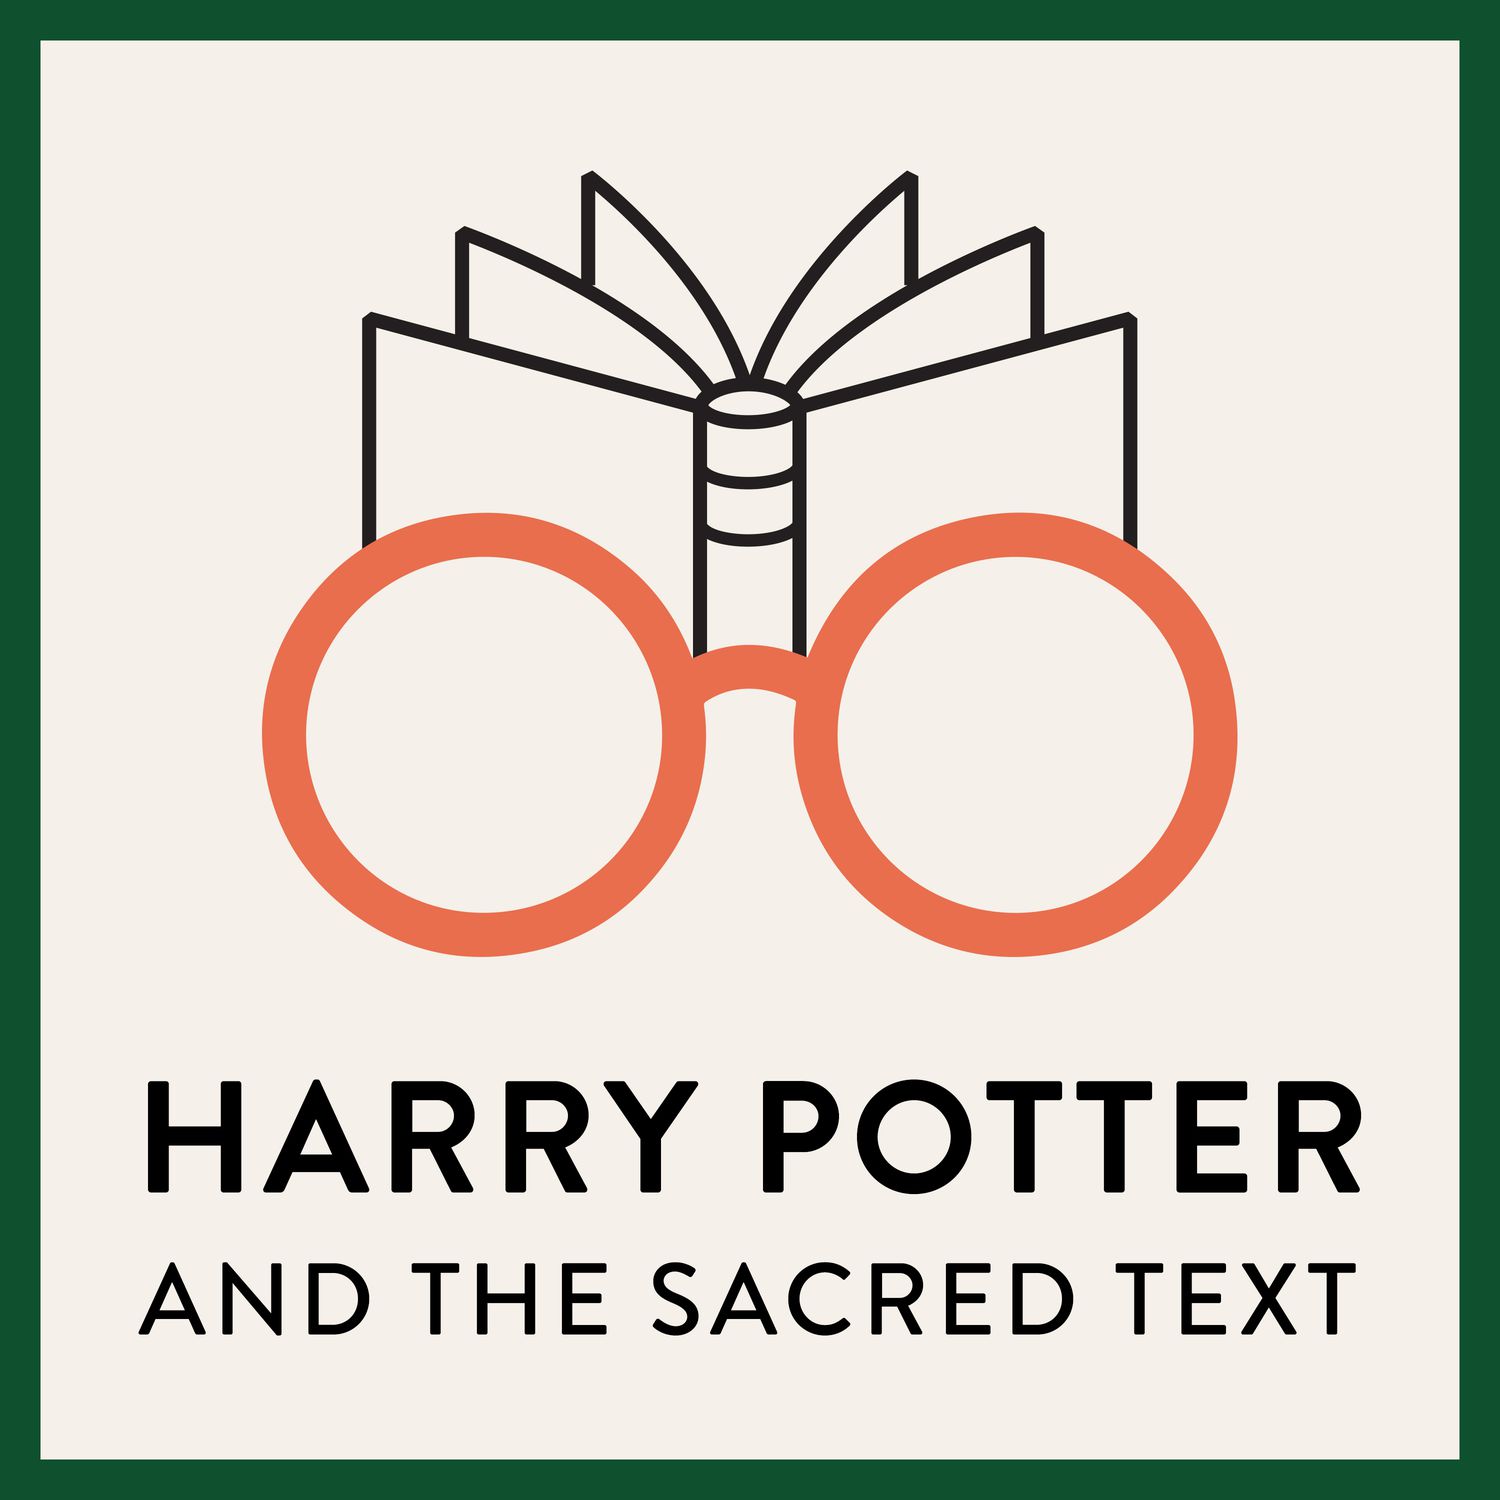 Harry Potter and the Sacred Text podcast